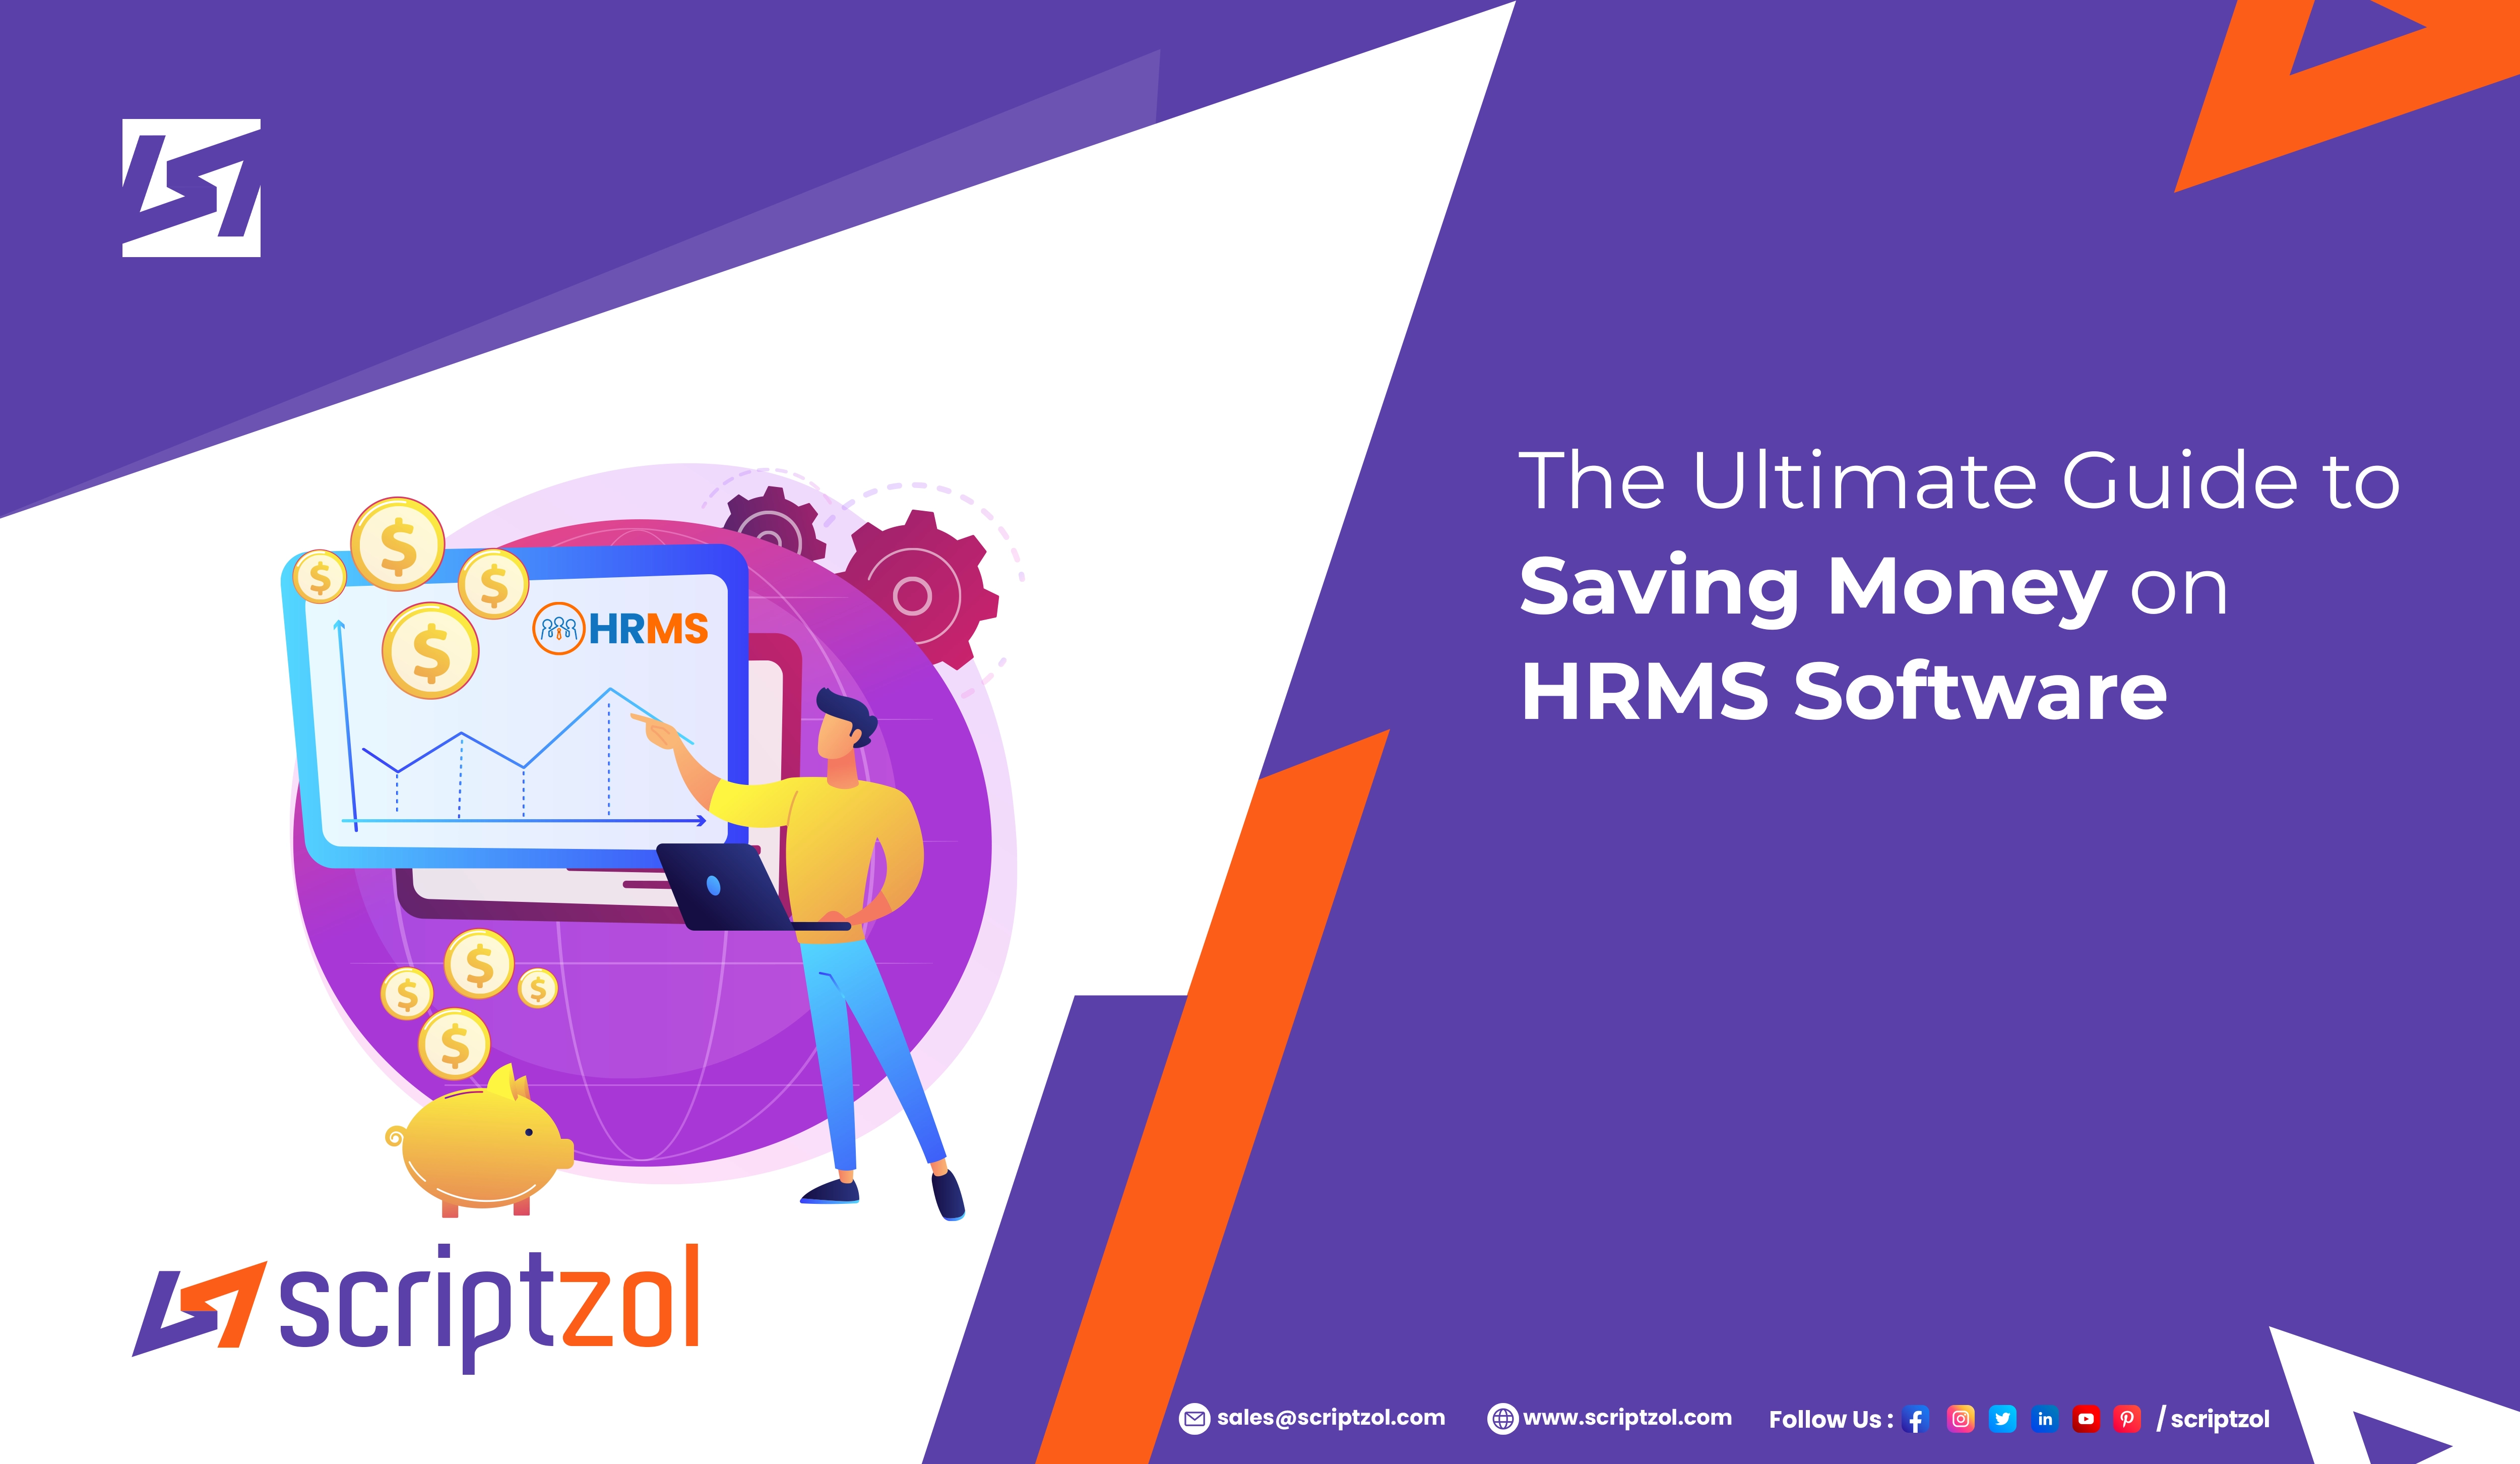 The Ultimate Guide to Saving Money on HRMS Software